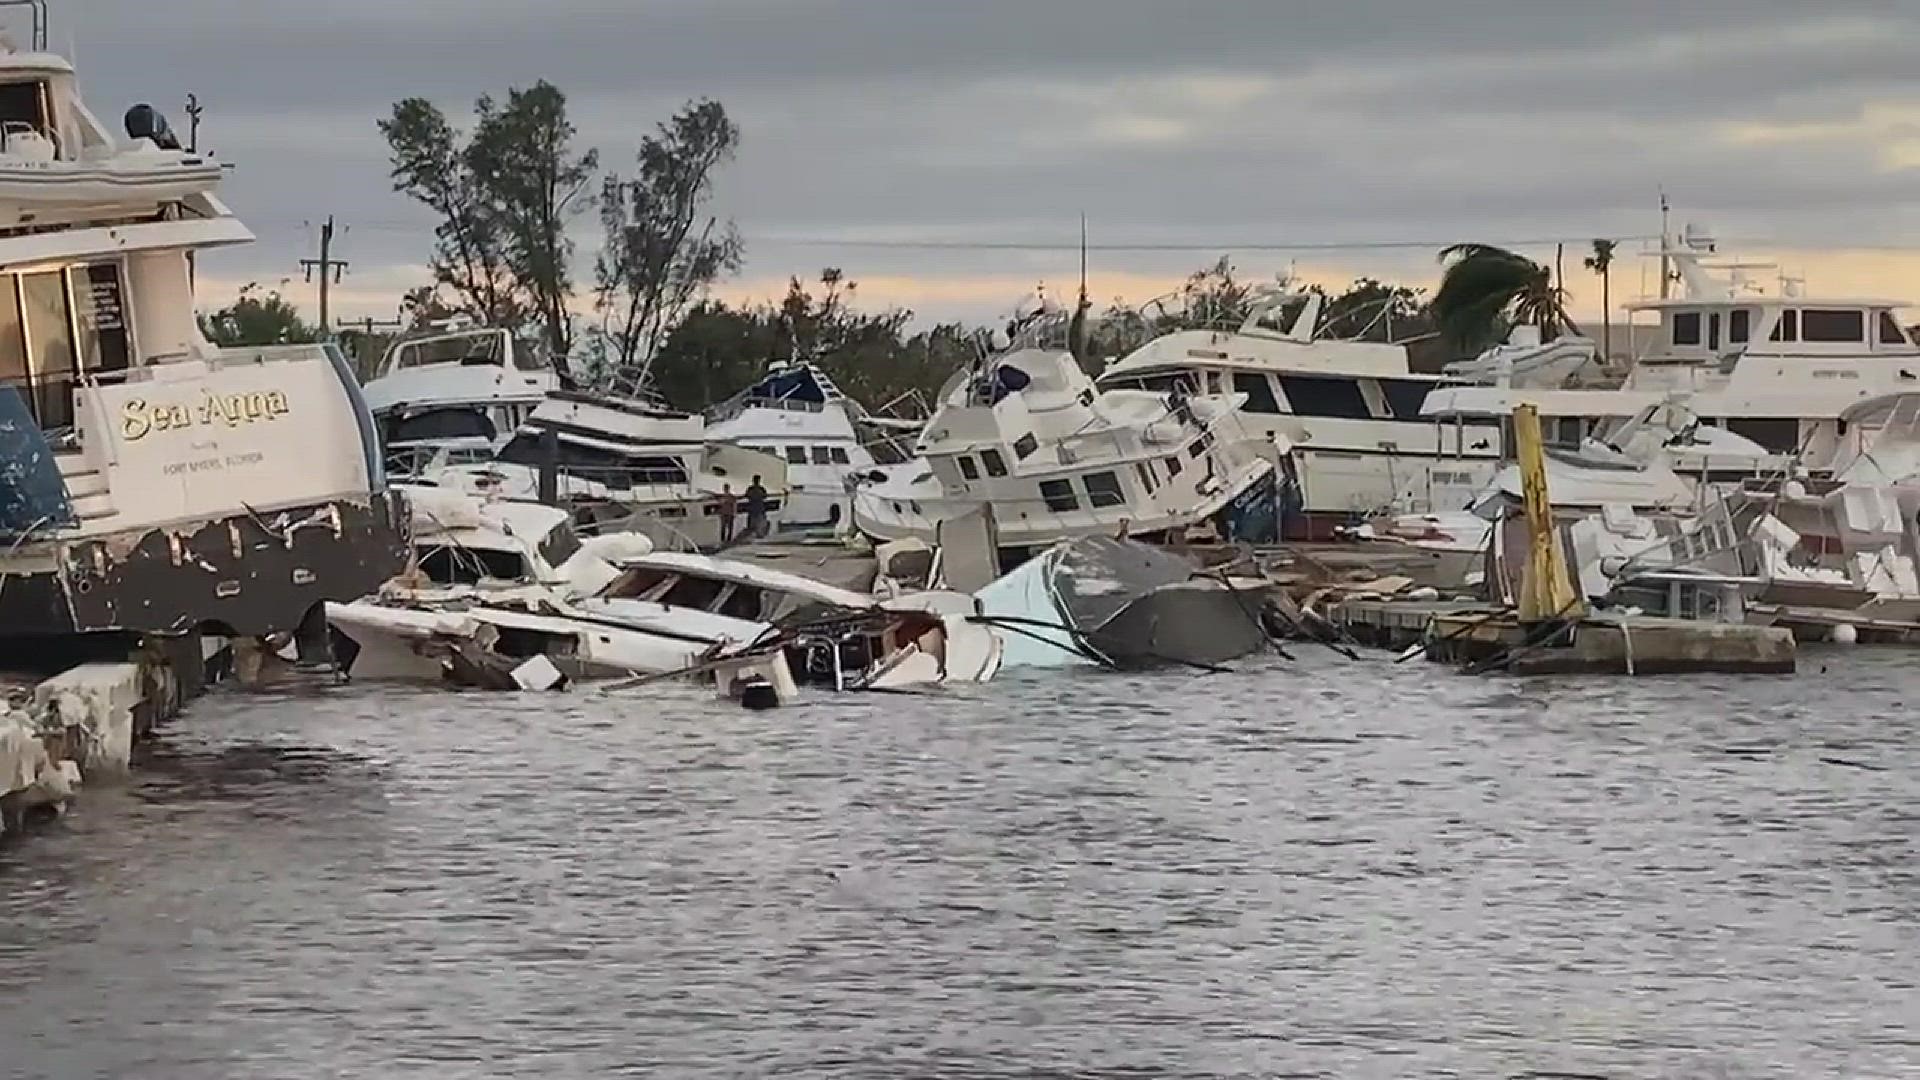 Boats left at Fort Myers marina were strewn all over after Hurricane Ian.